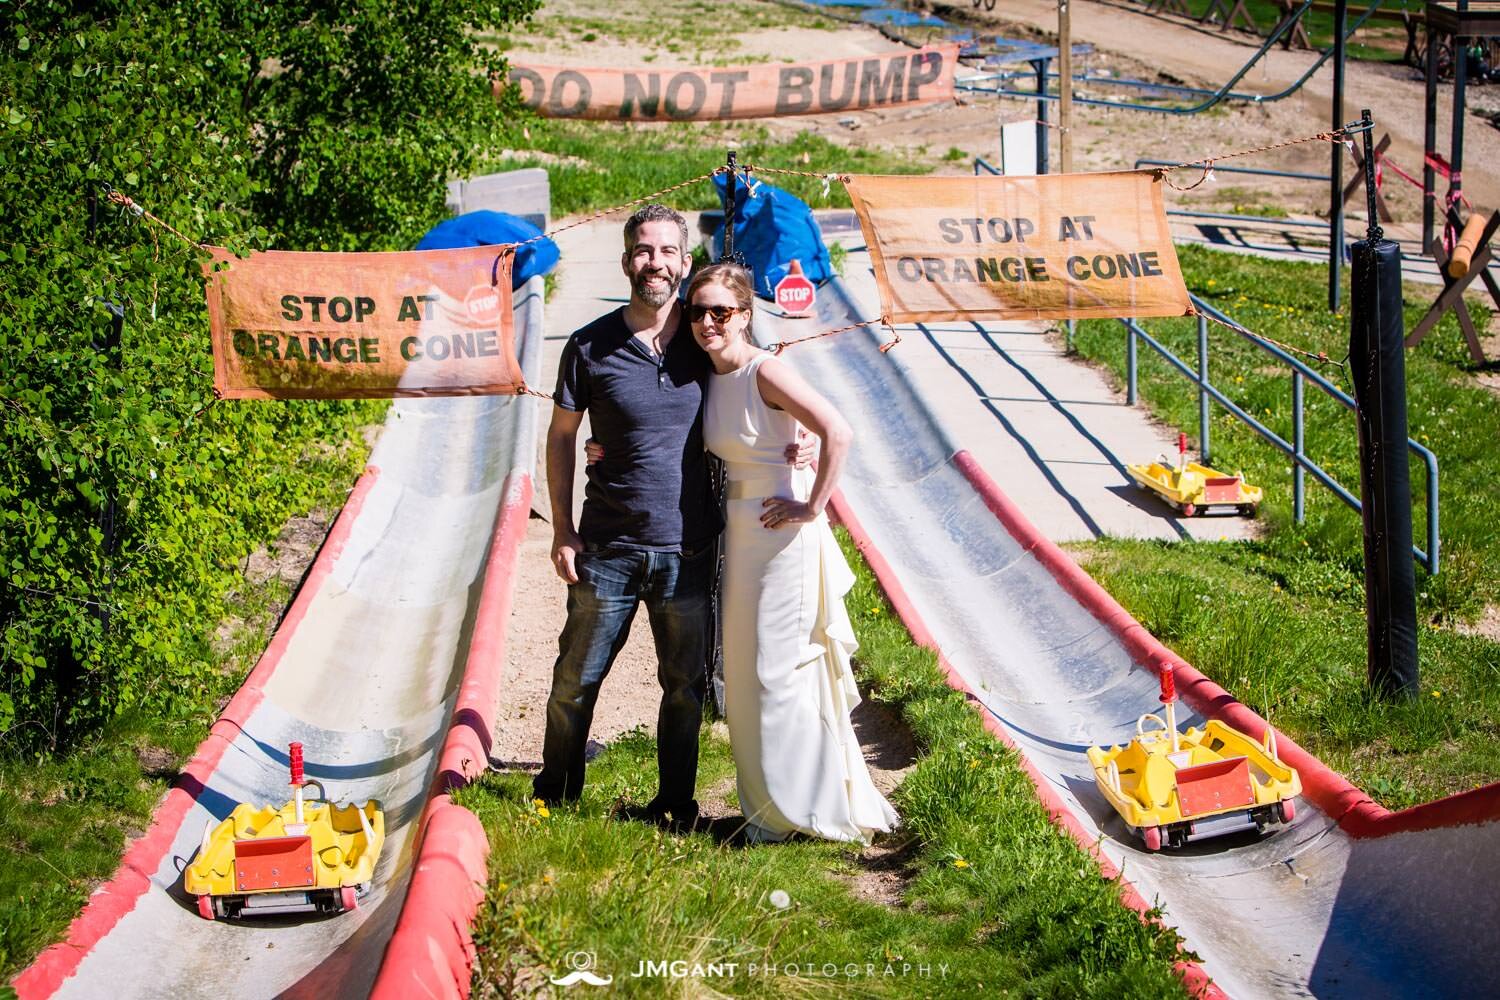  Bride and groom riding down the Winter Park Alpine Slide.&nbsp; 